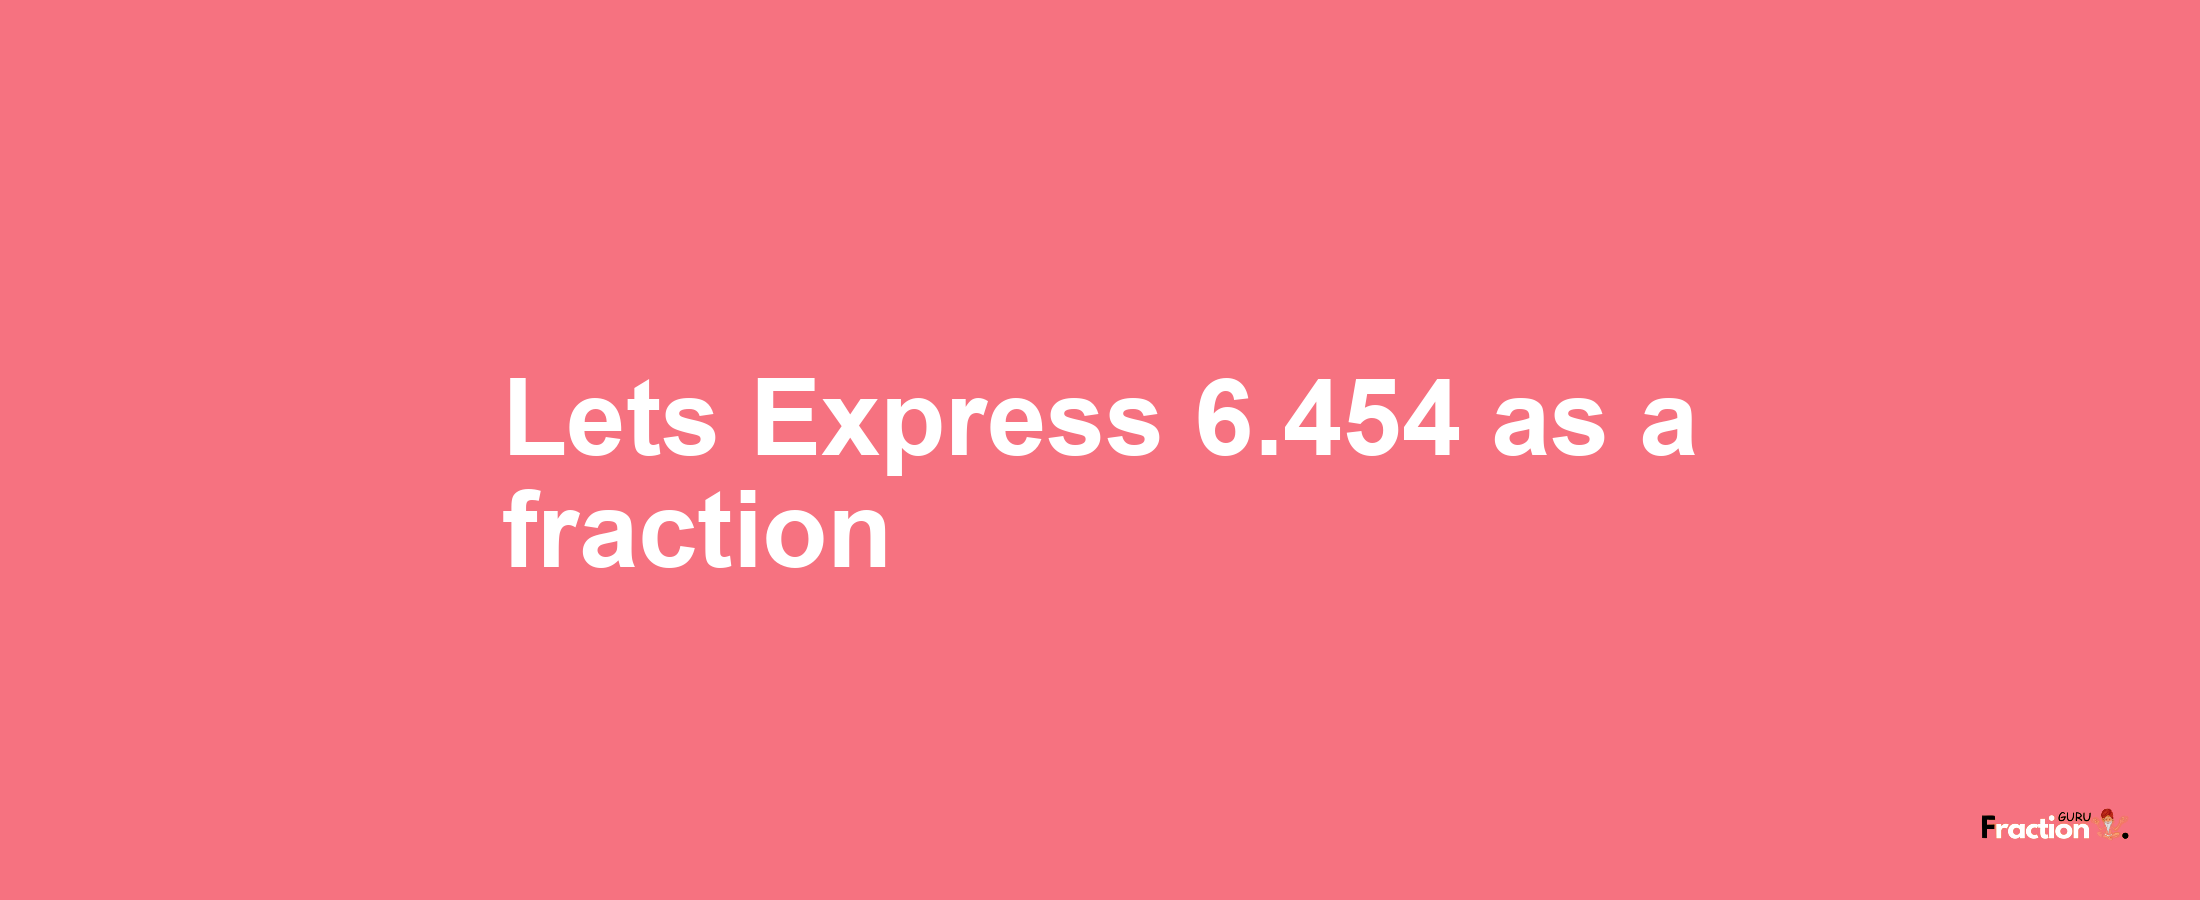 Lets Express 6.454 as afraction